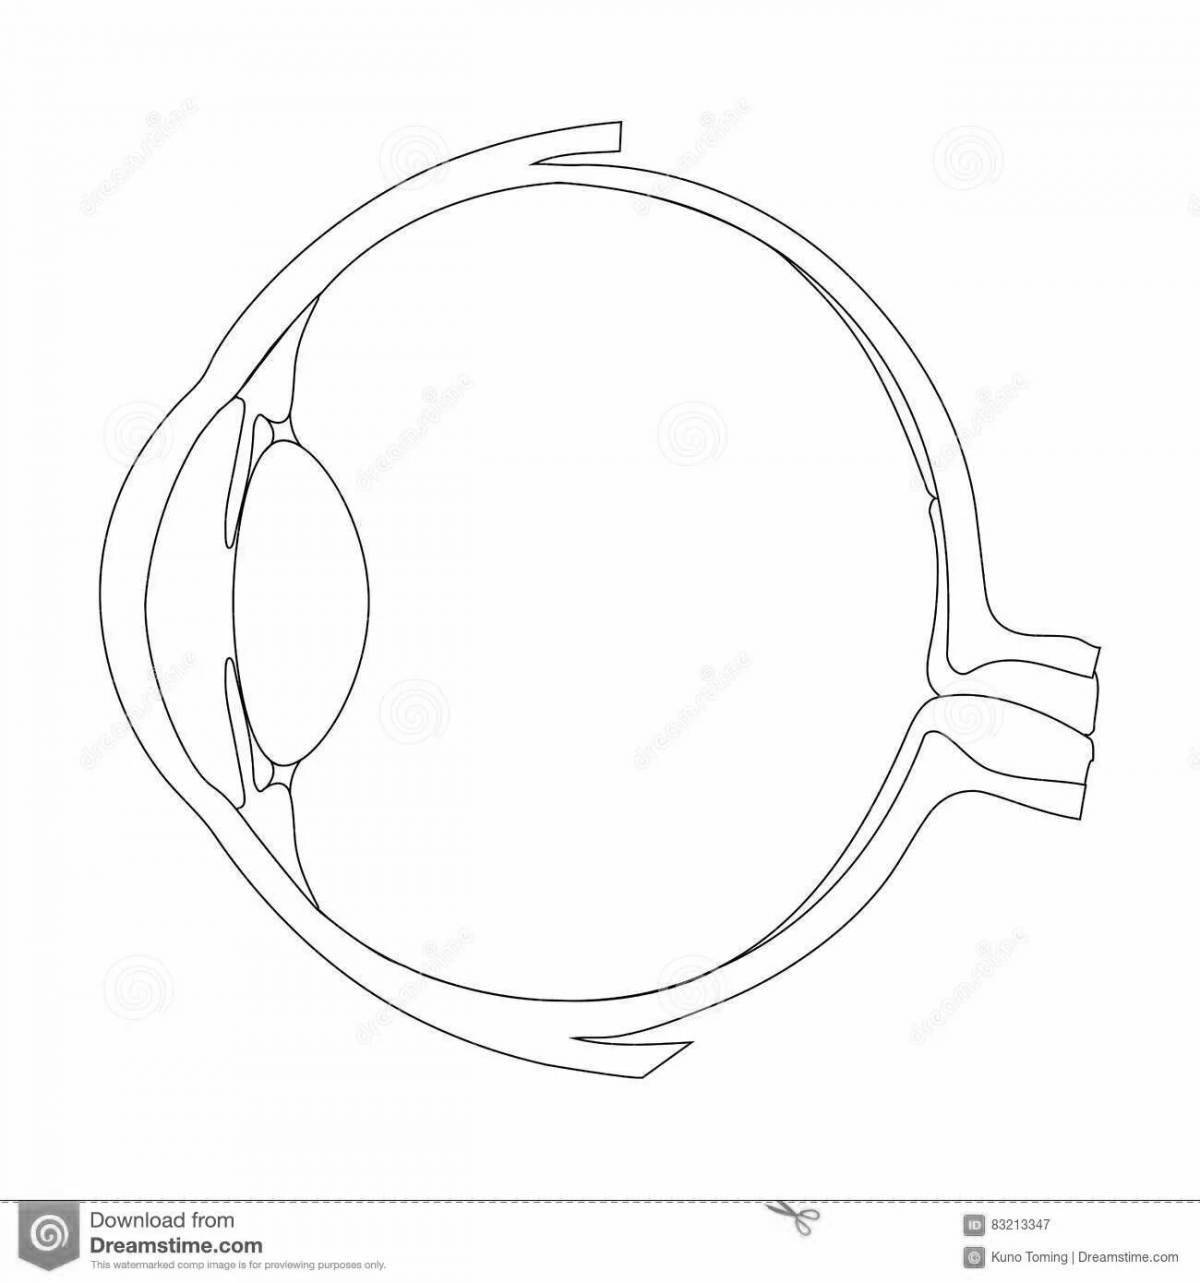 Illuminated eye structure coloring page